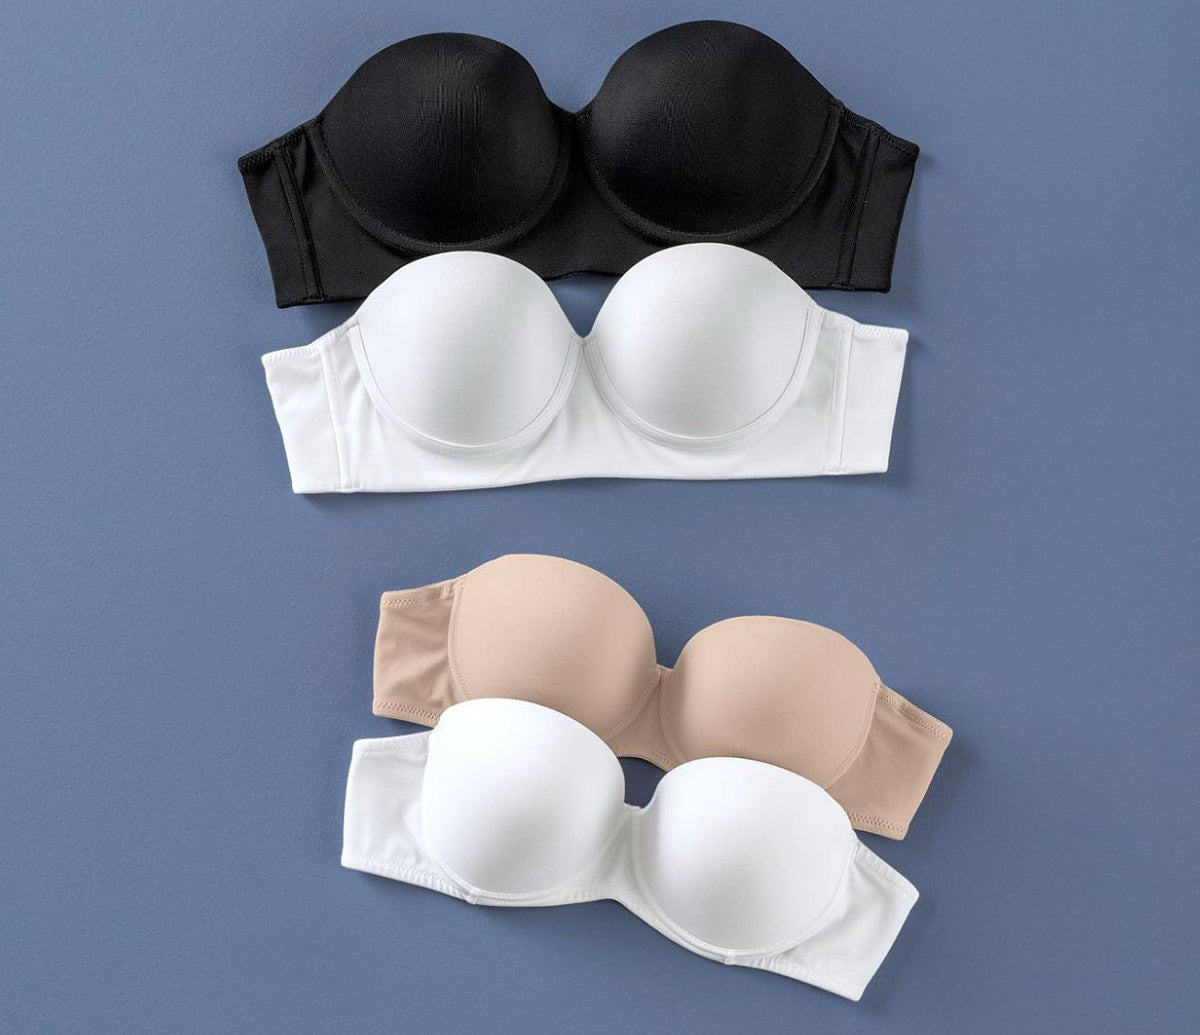 What Kind of Bra to Wear With an Off-the-Shoulder or Halter Top? These!